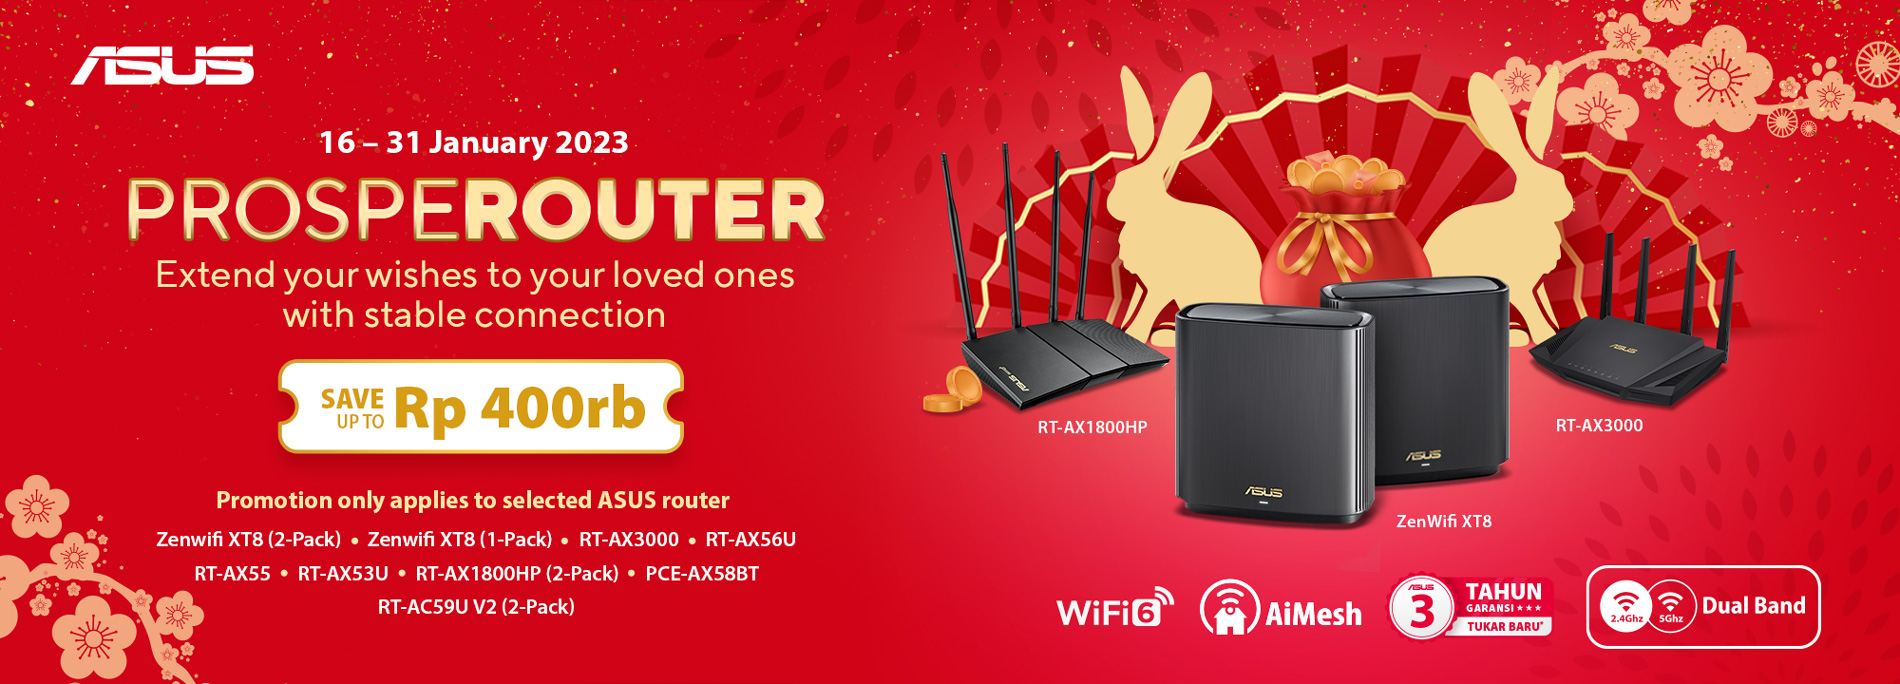 PROSPEROUTER — ASUS Wireless Router CNY Campaign 16-31 January 2023